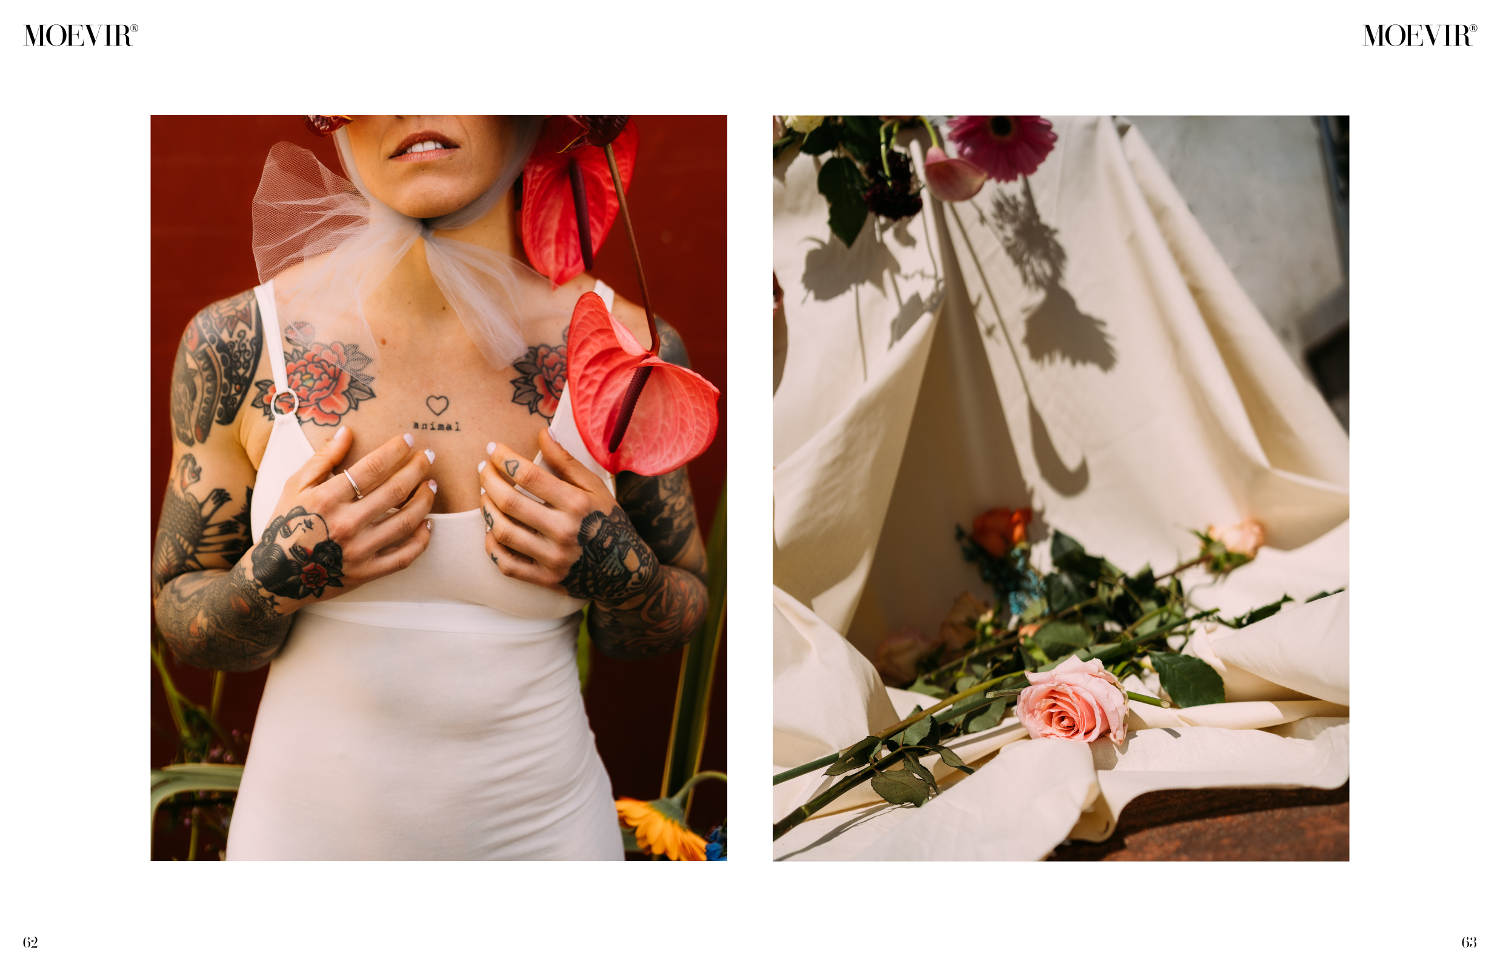 Flowers and Tattoos Moevir Magazine June Issue - by Irati Ayerza